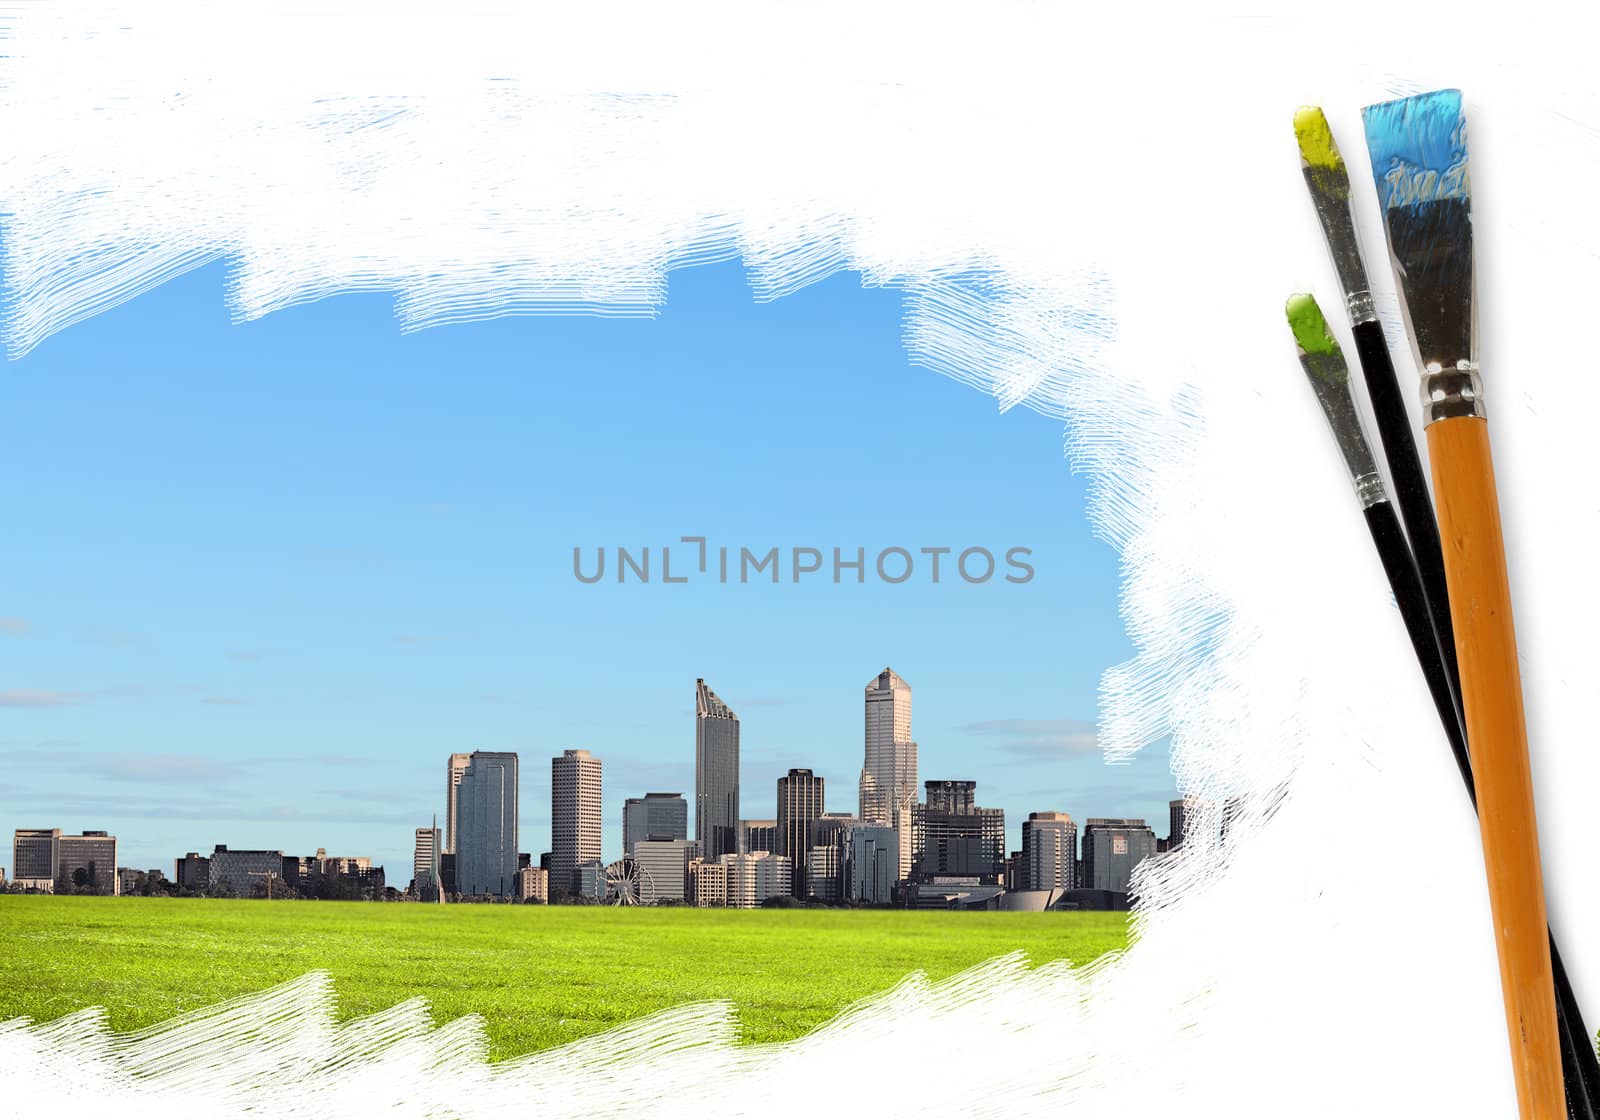 Picture of sunny nature landscape and brushes